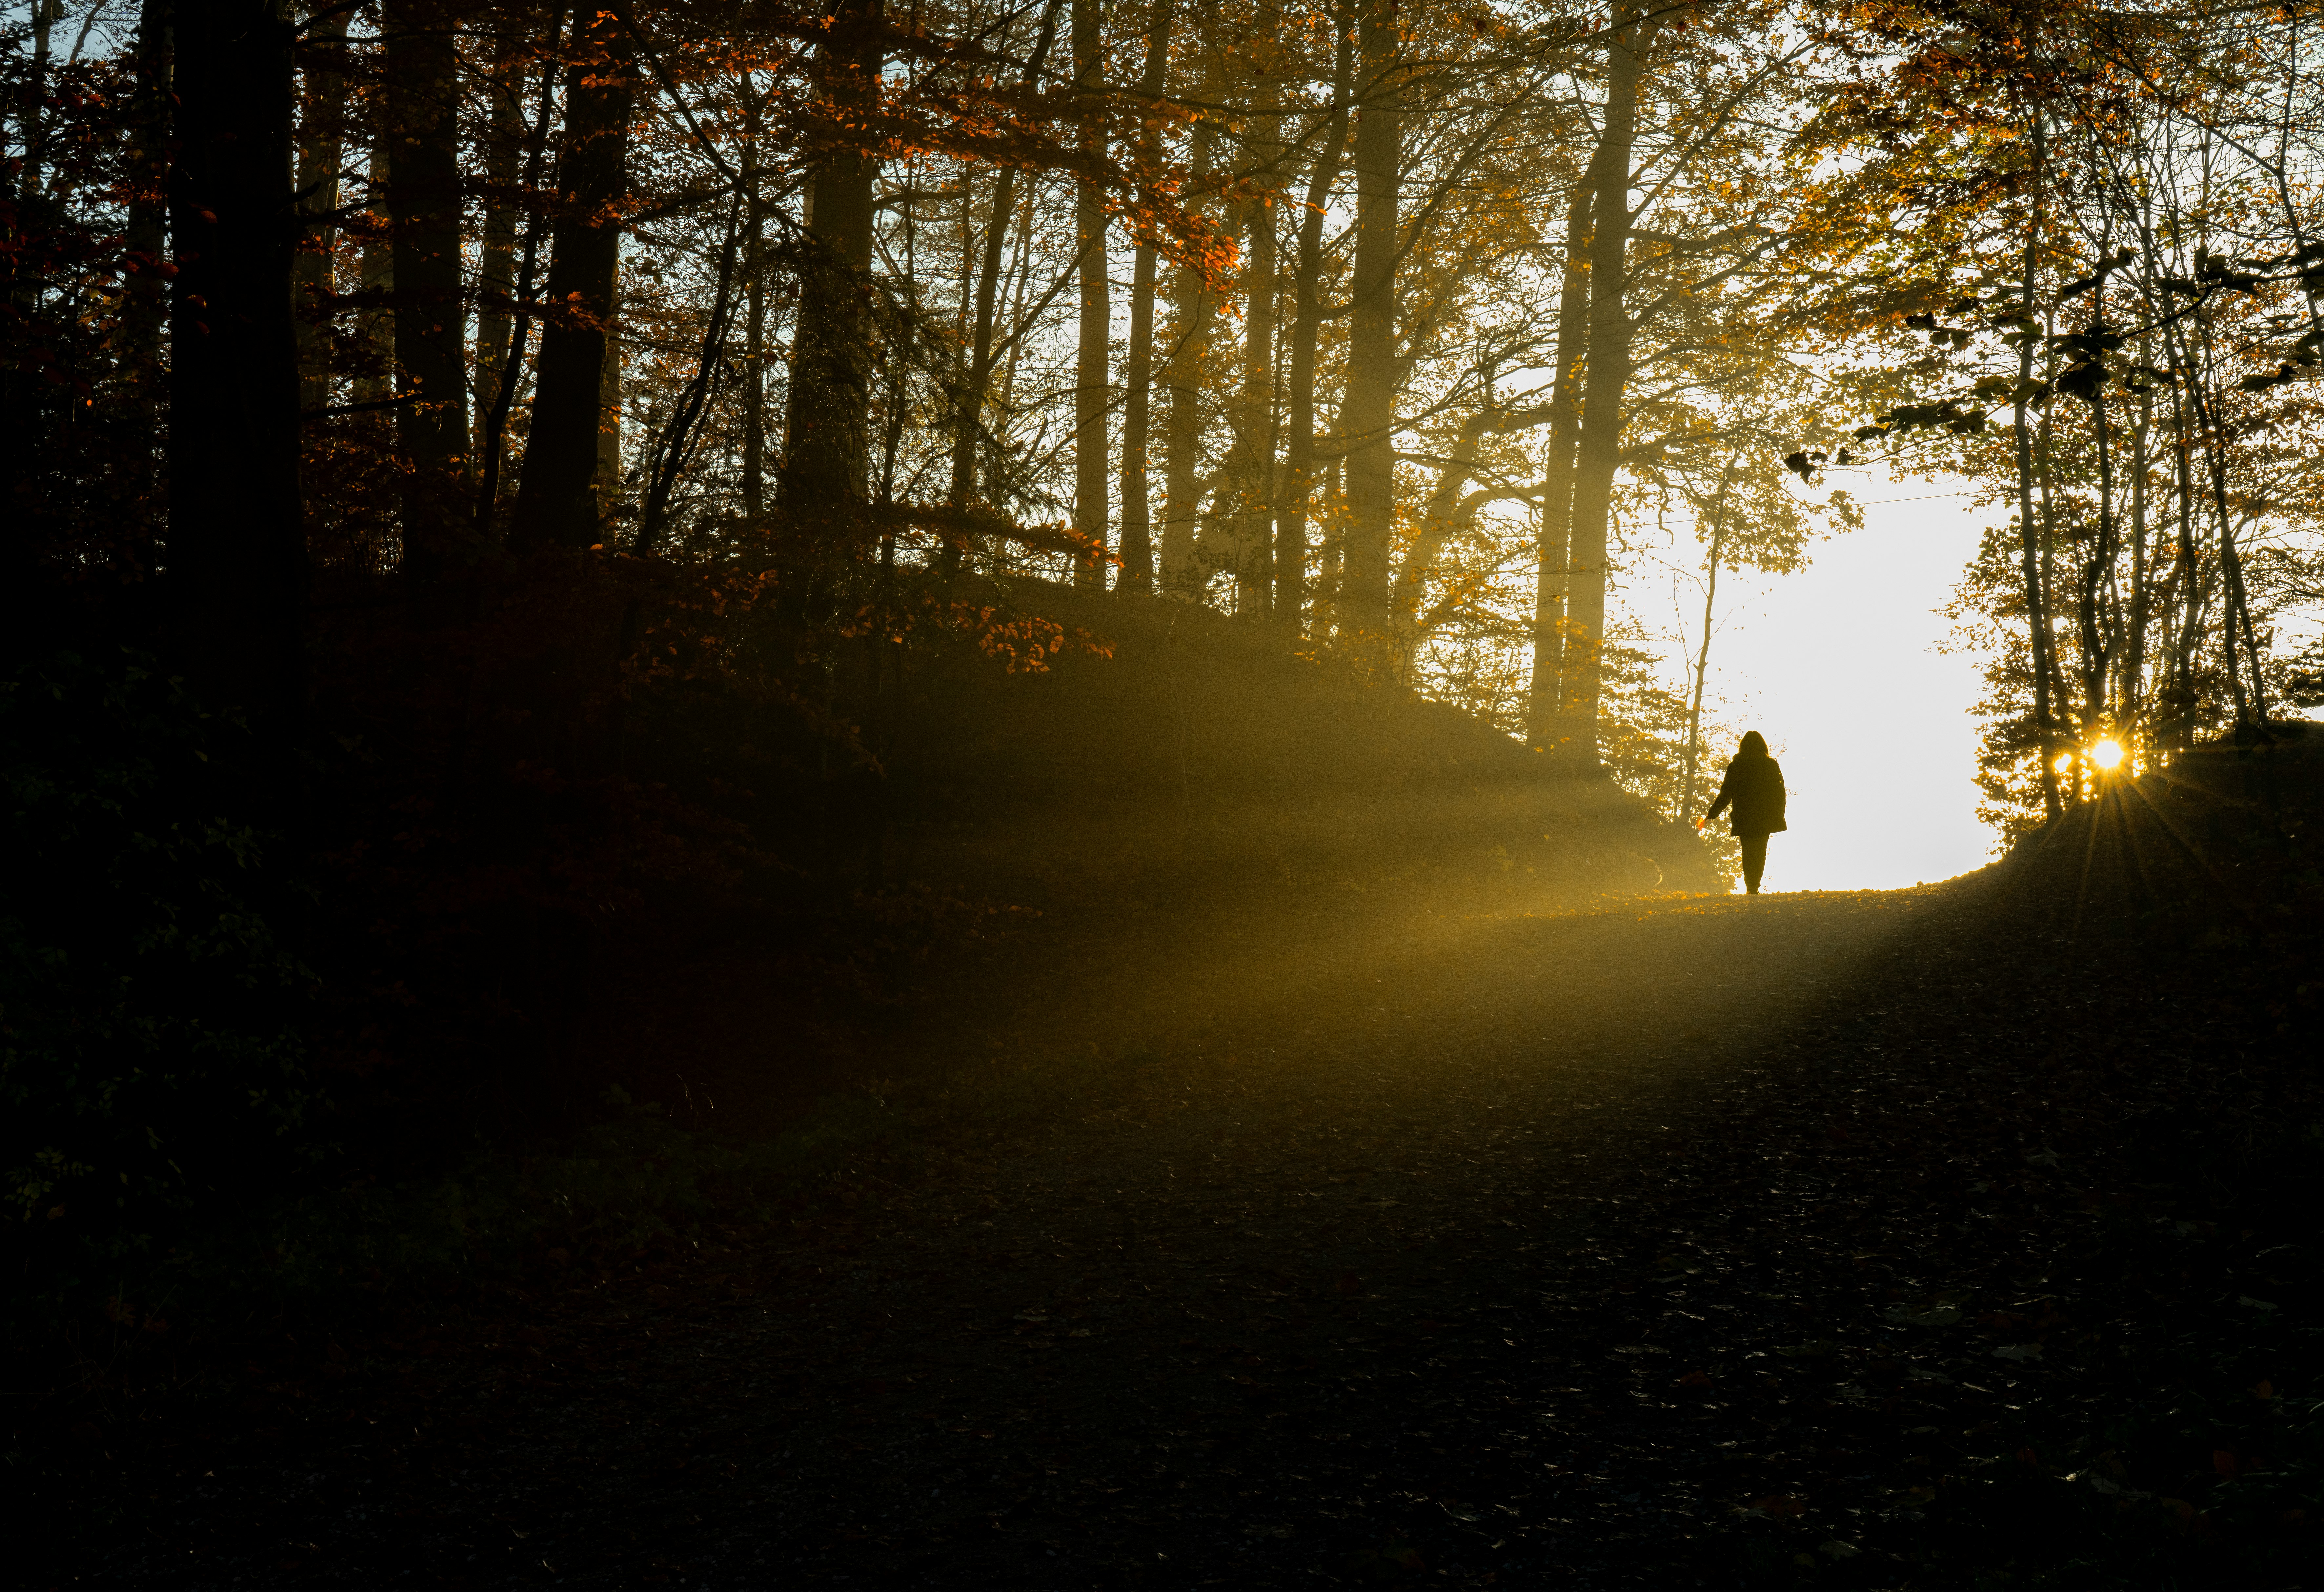 silhouette of person walking on pathway between trees during daytime